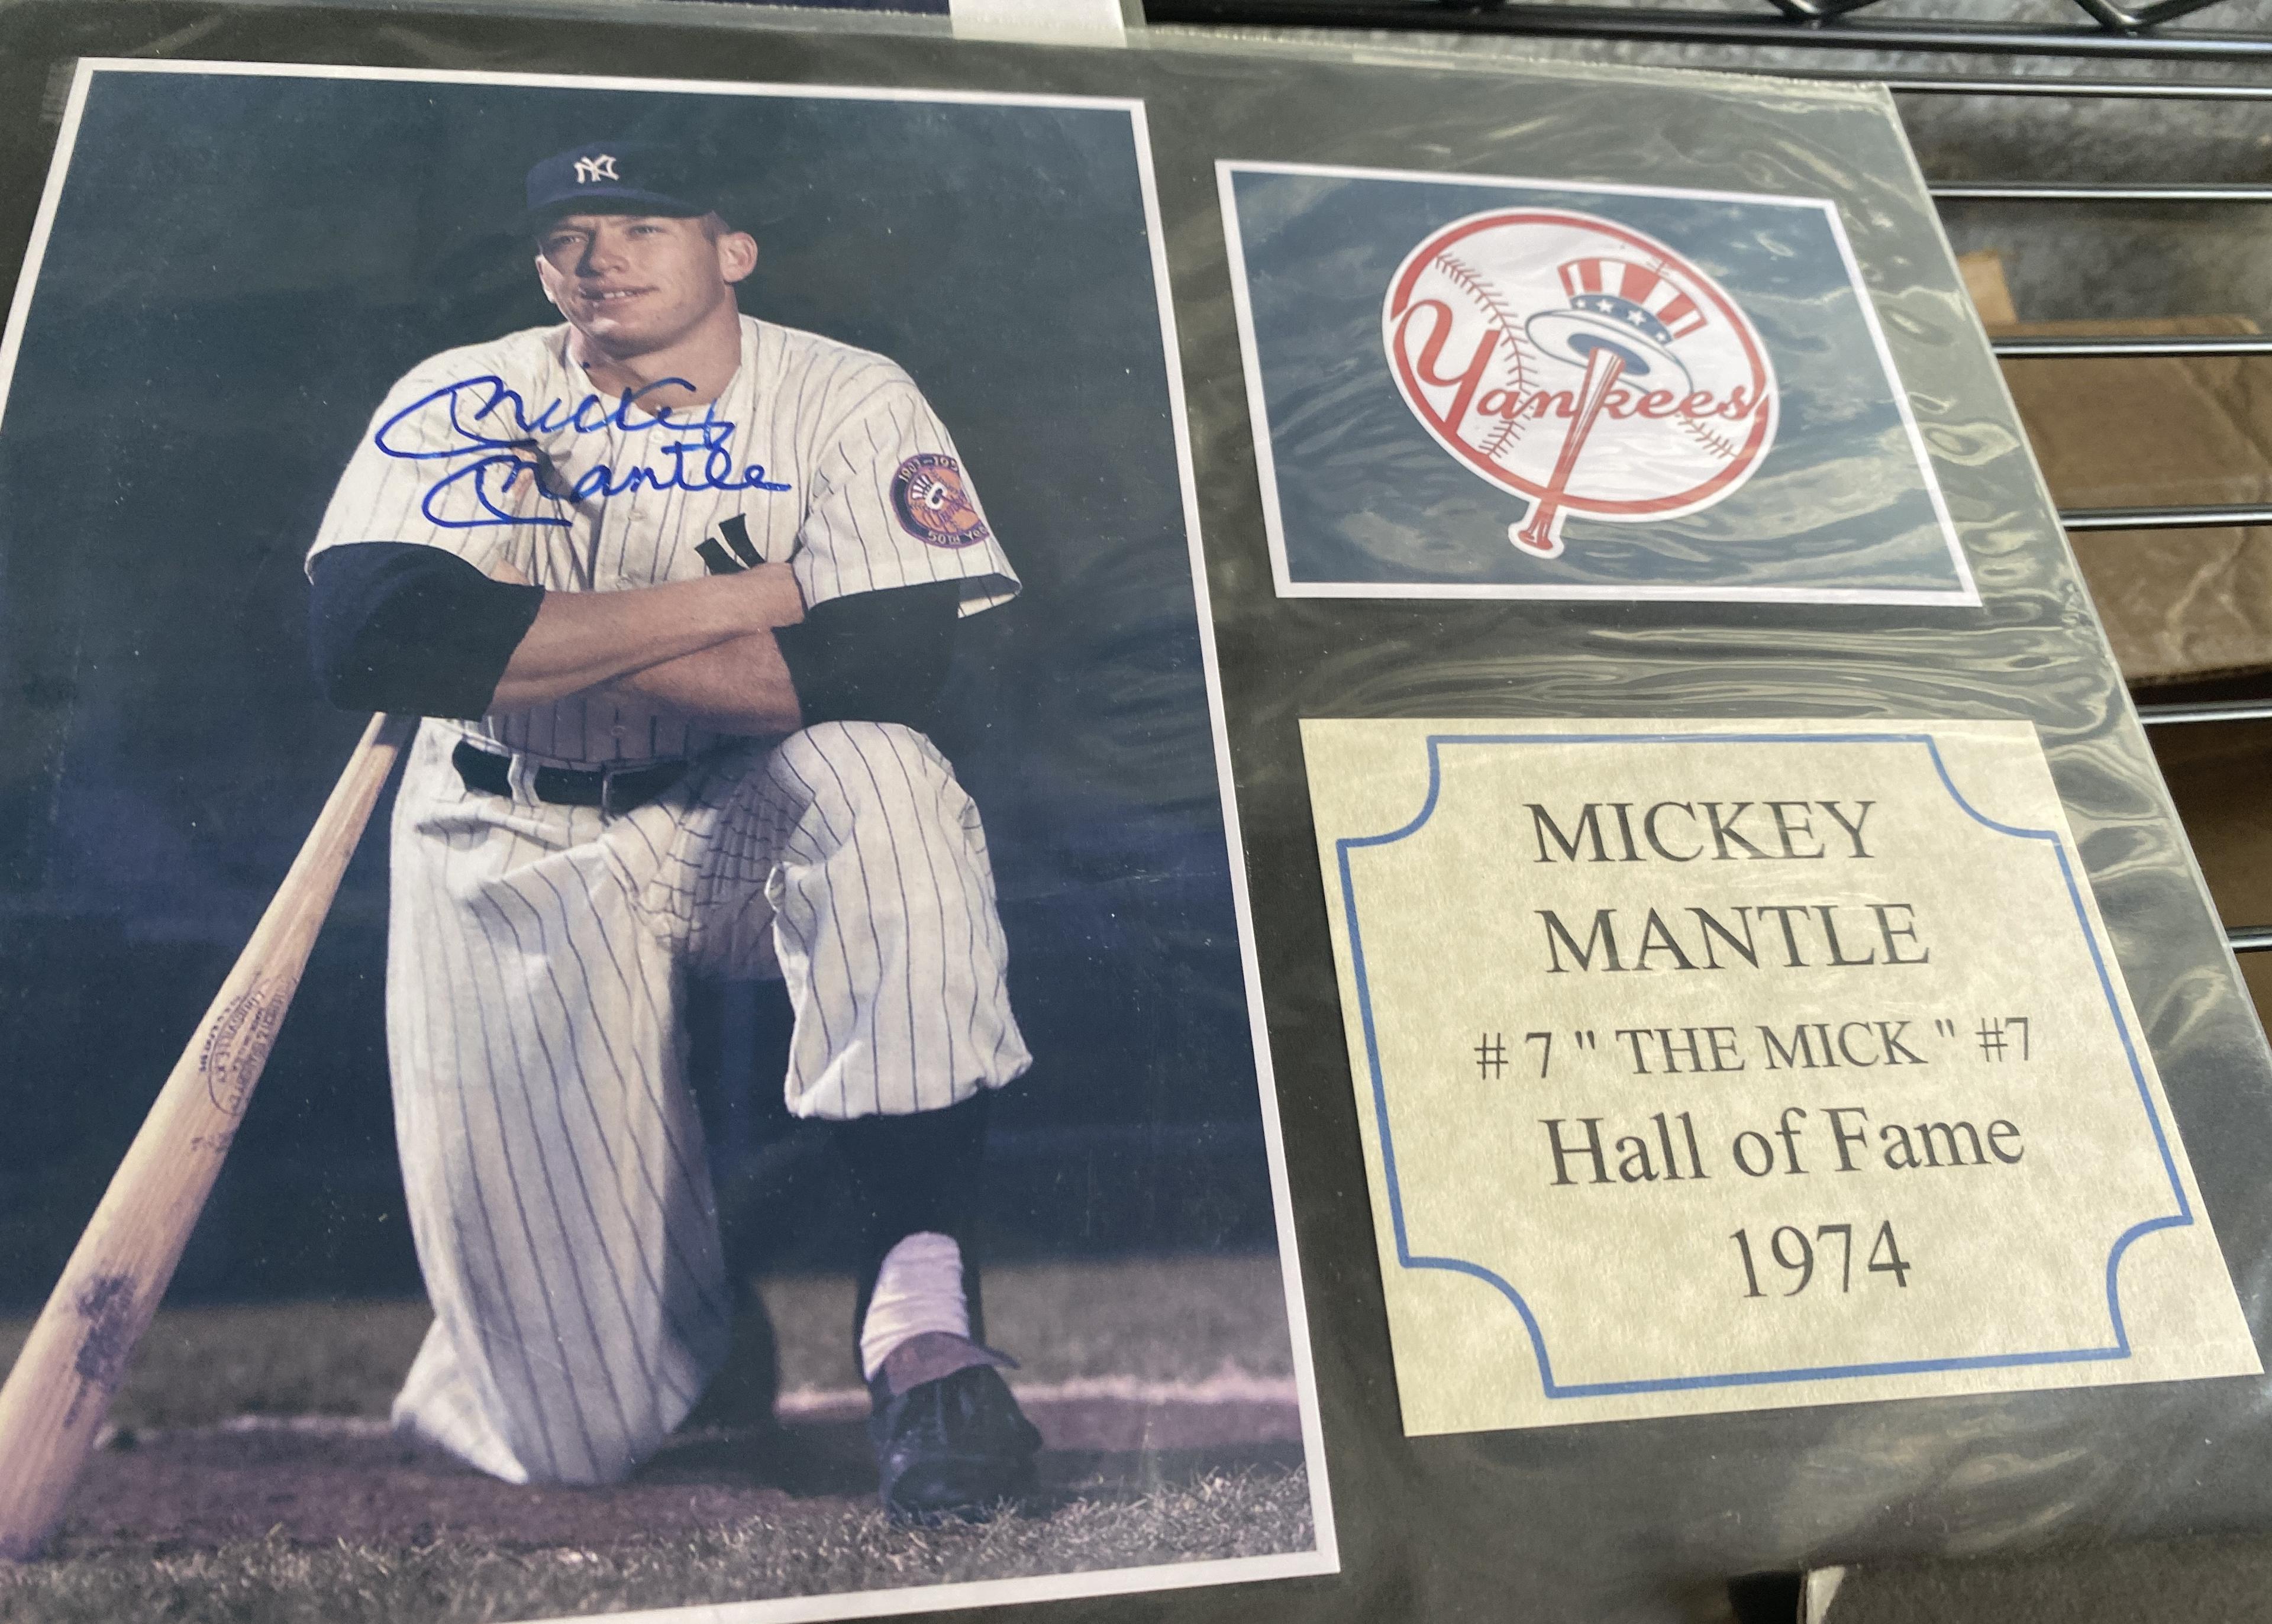 Large Lot of 8” x 10” matted signed photos. The lot consists of Mostly Legendary Baseball Hall of Fa